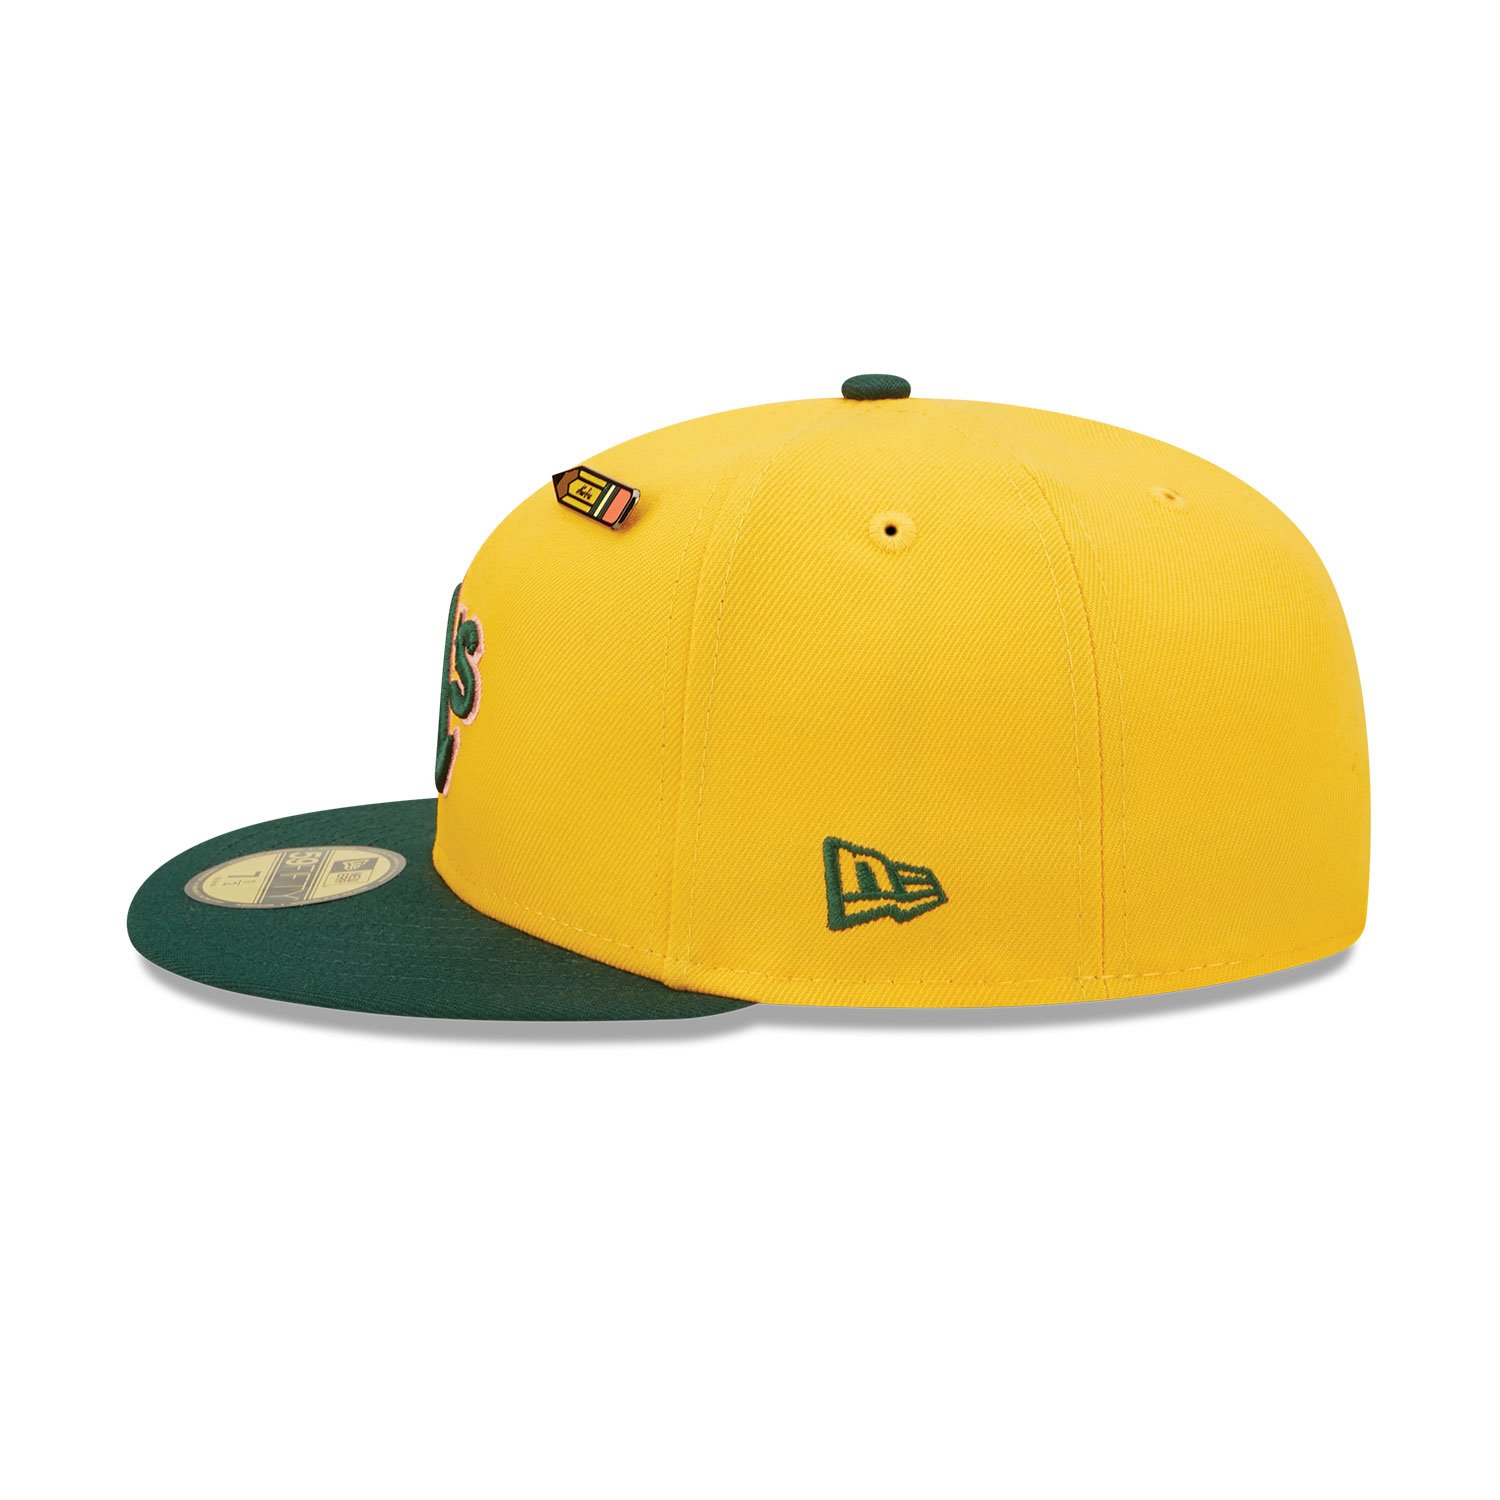 Oakland Athletics Back to School Yellow 59FIFTY Fitted Cap